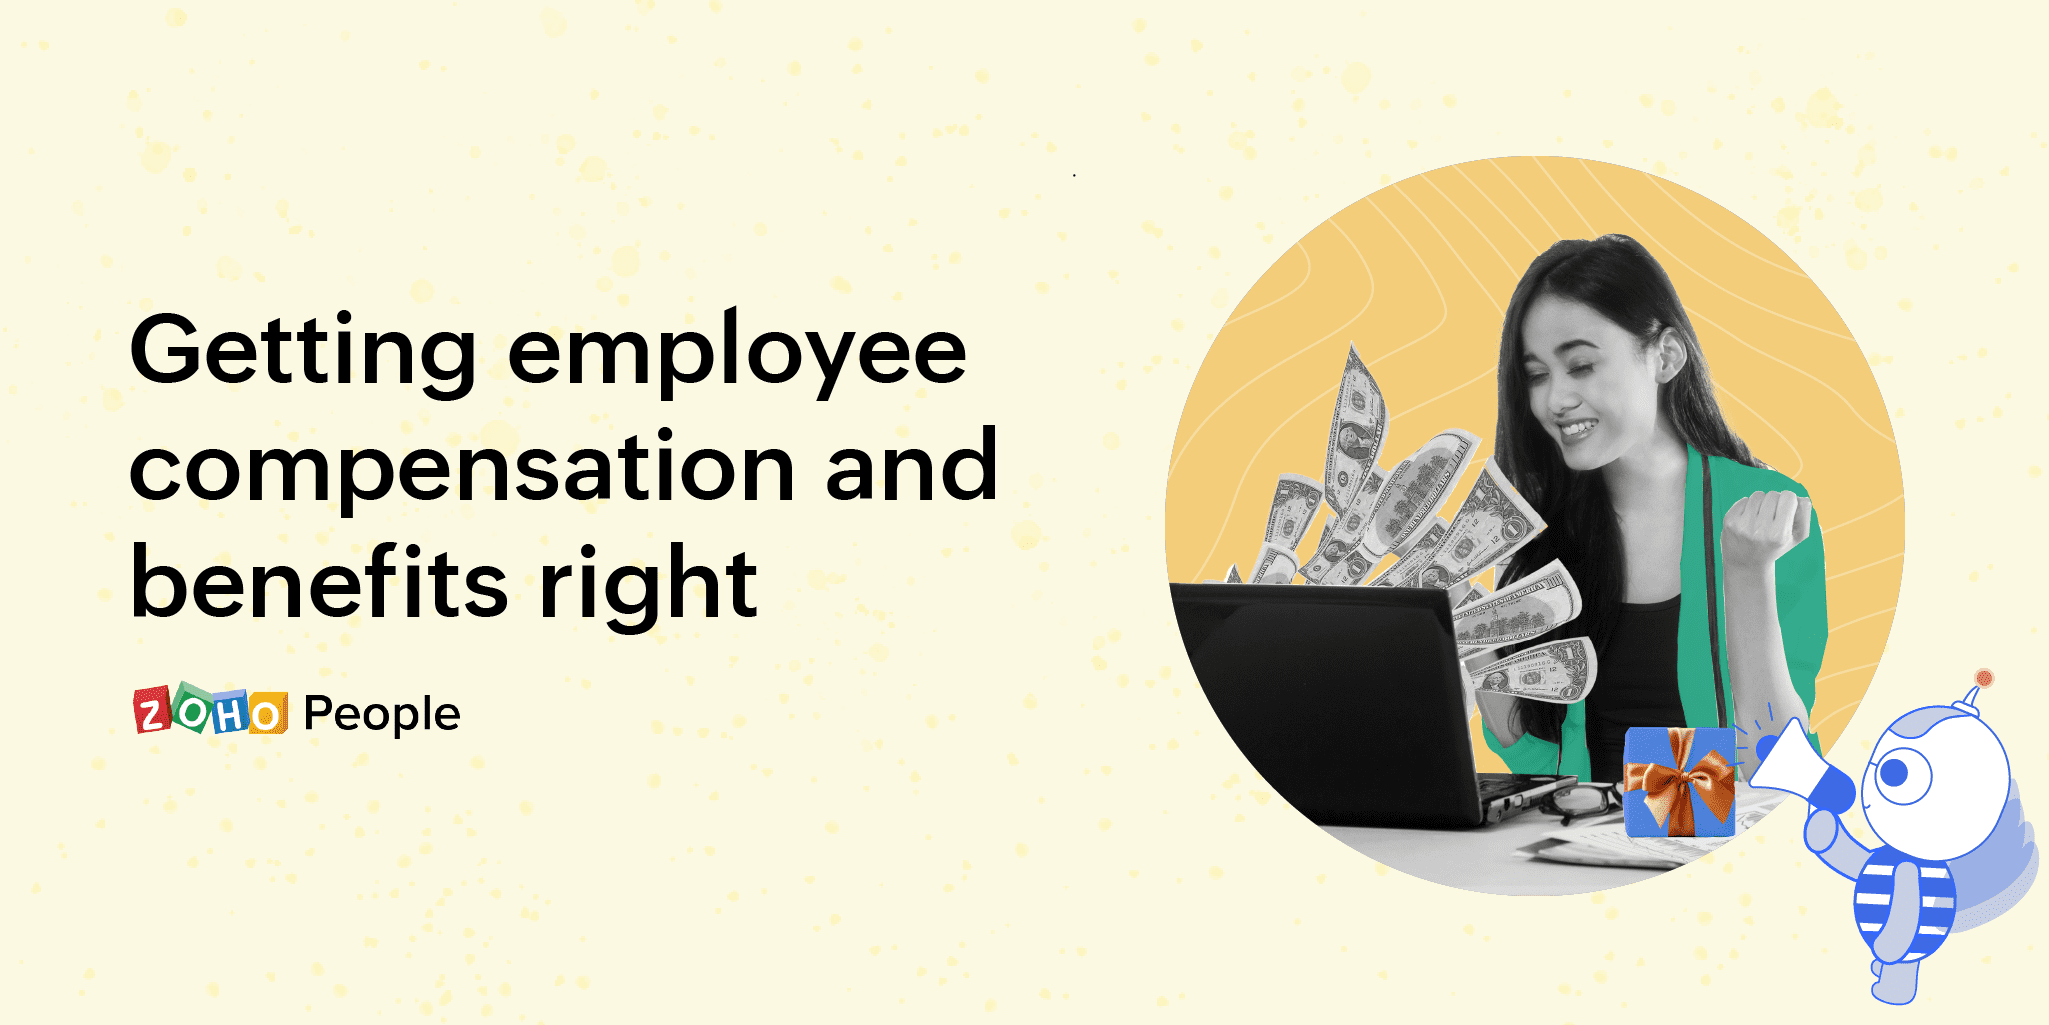 Tips to get employee compensation and benefits right